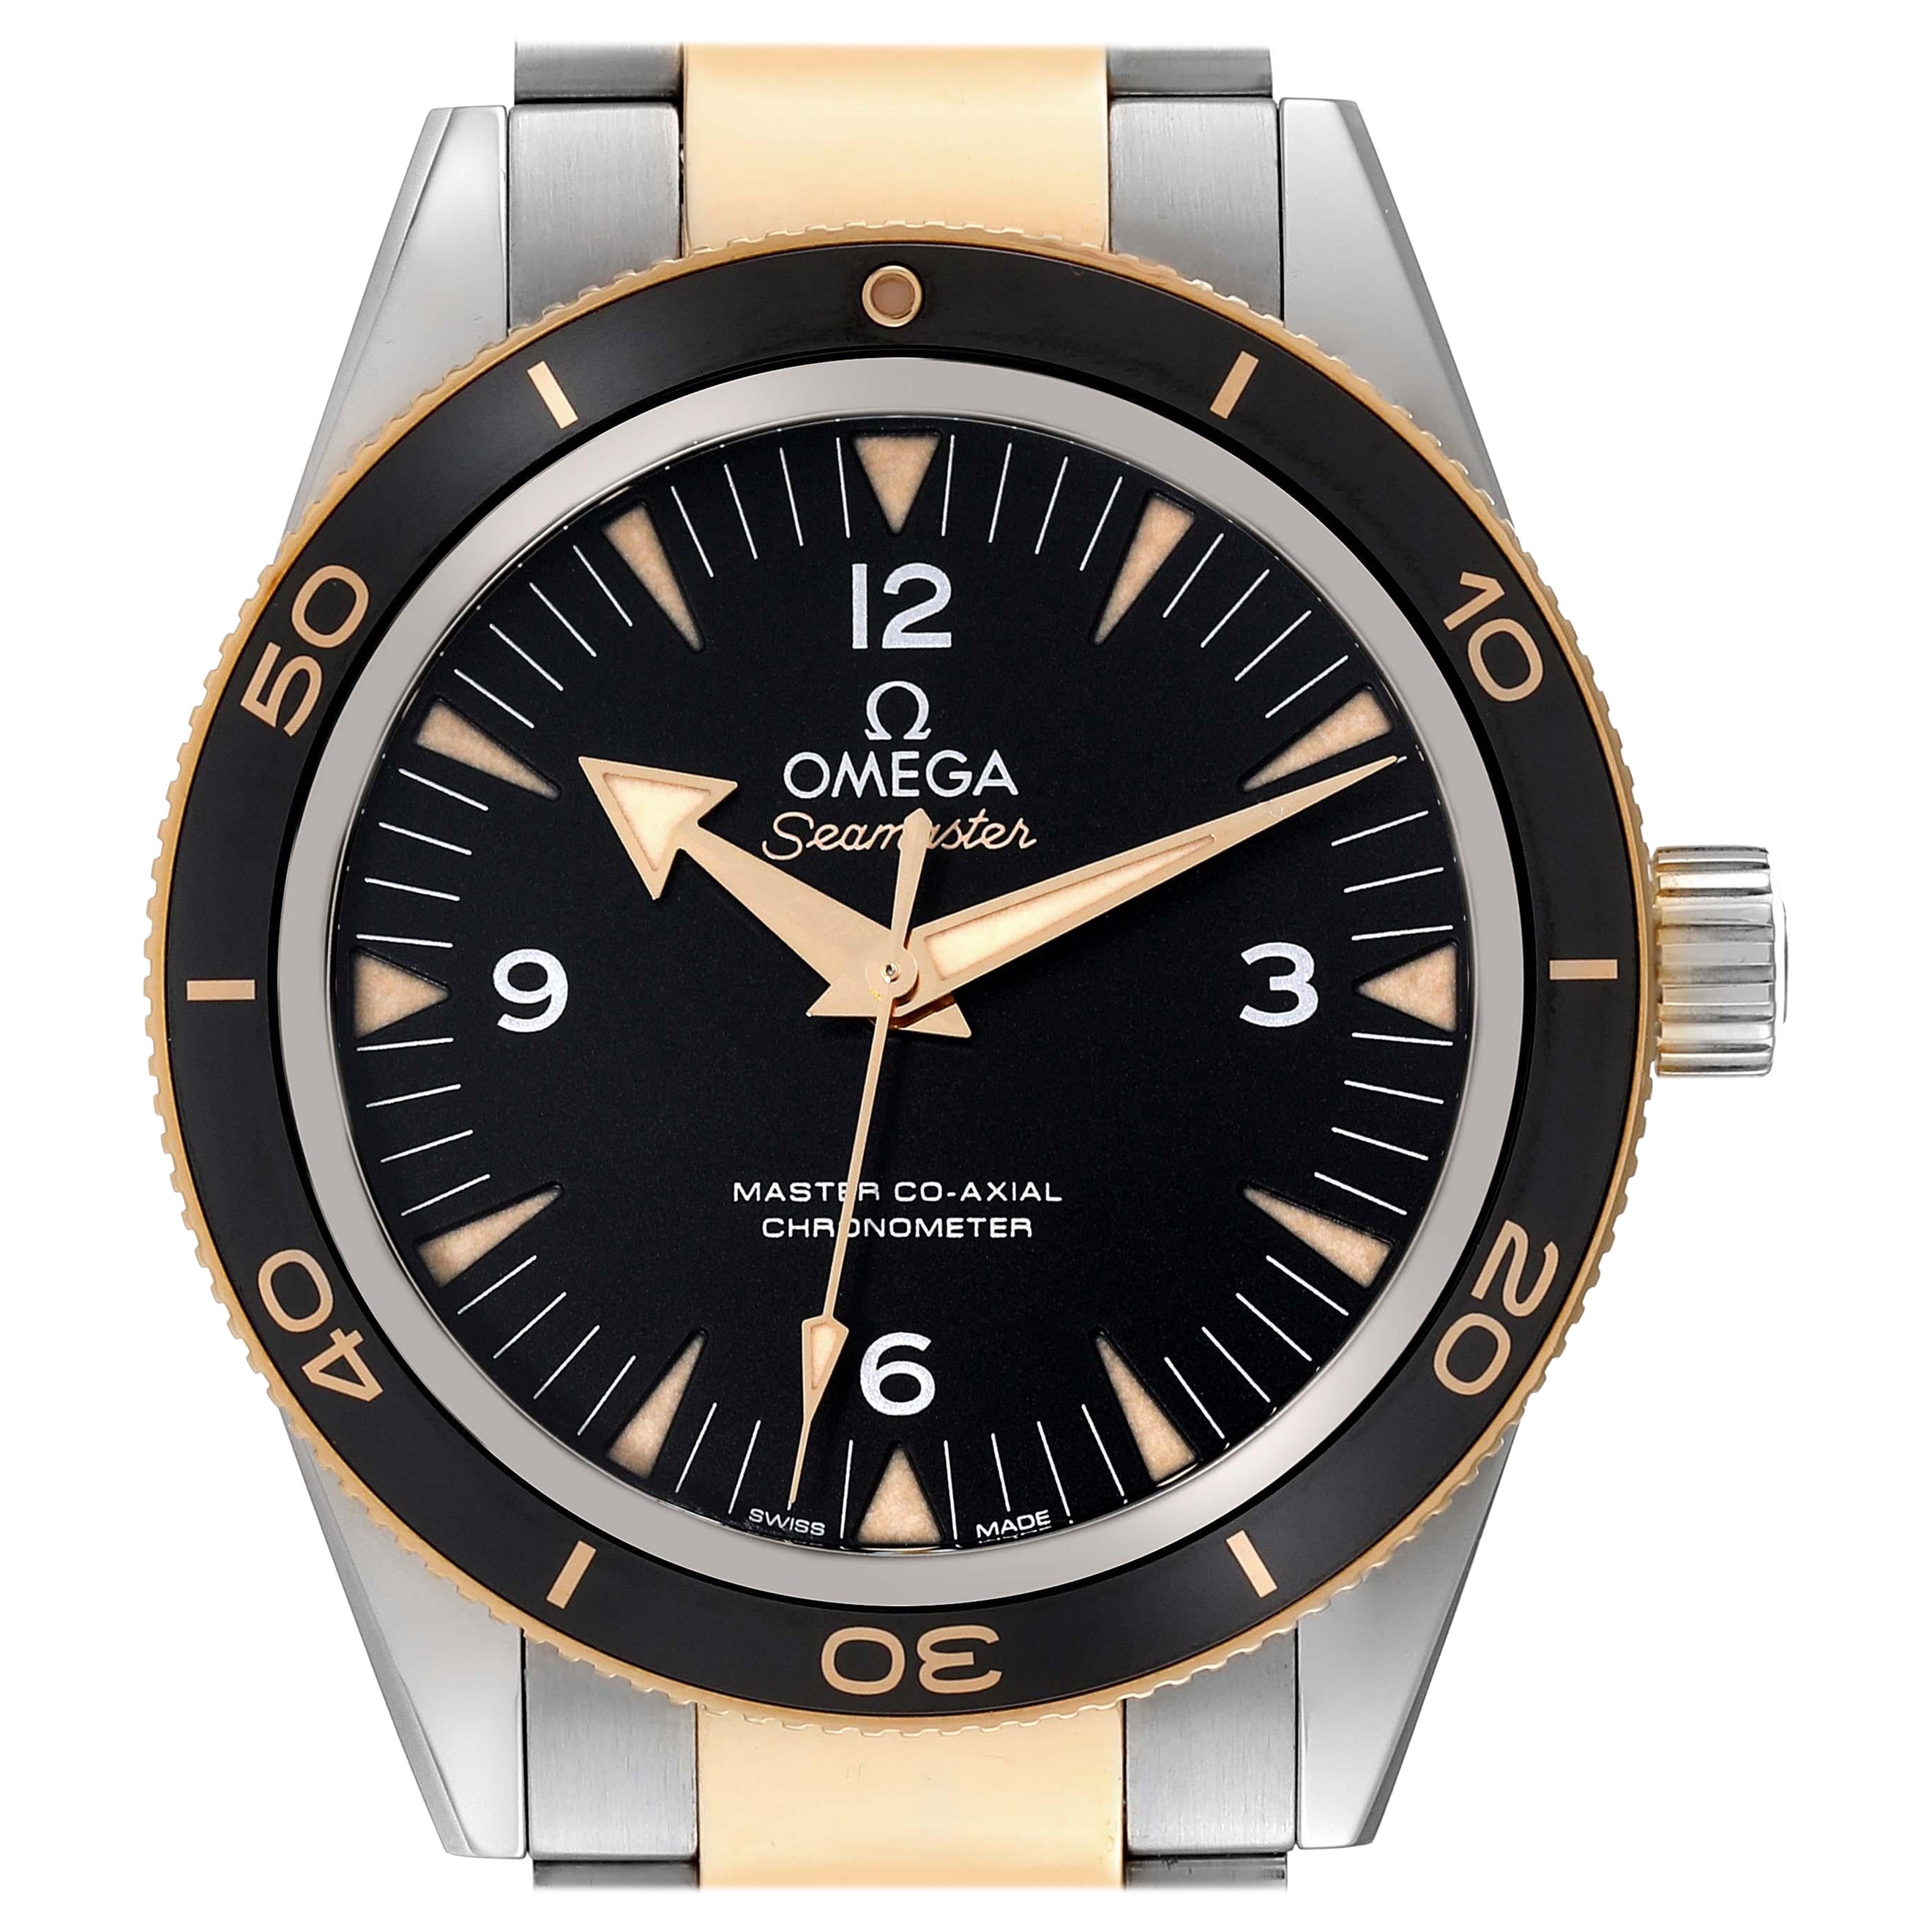 Omega Seamaster 300M Steel Yellow Gold Mens Watch 233.20.41.21.01.002 Card For Sale